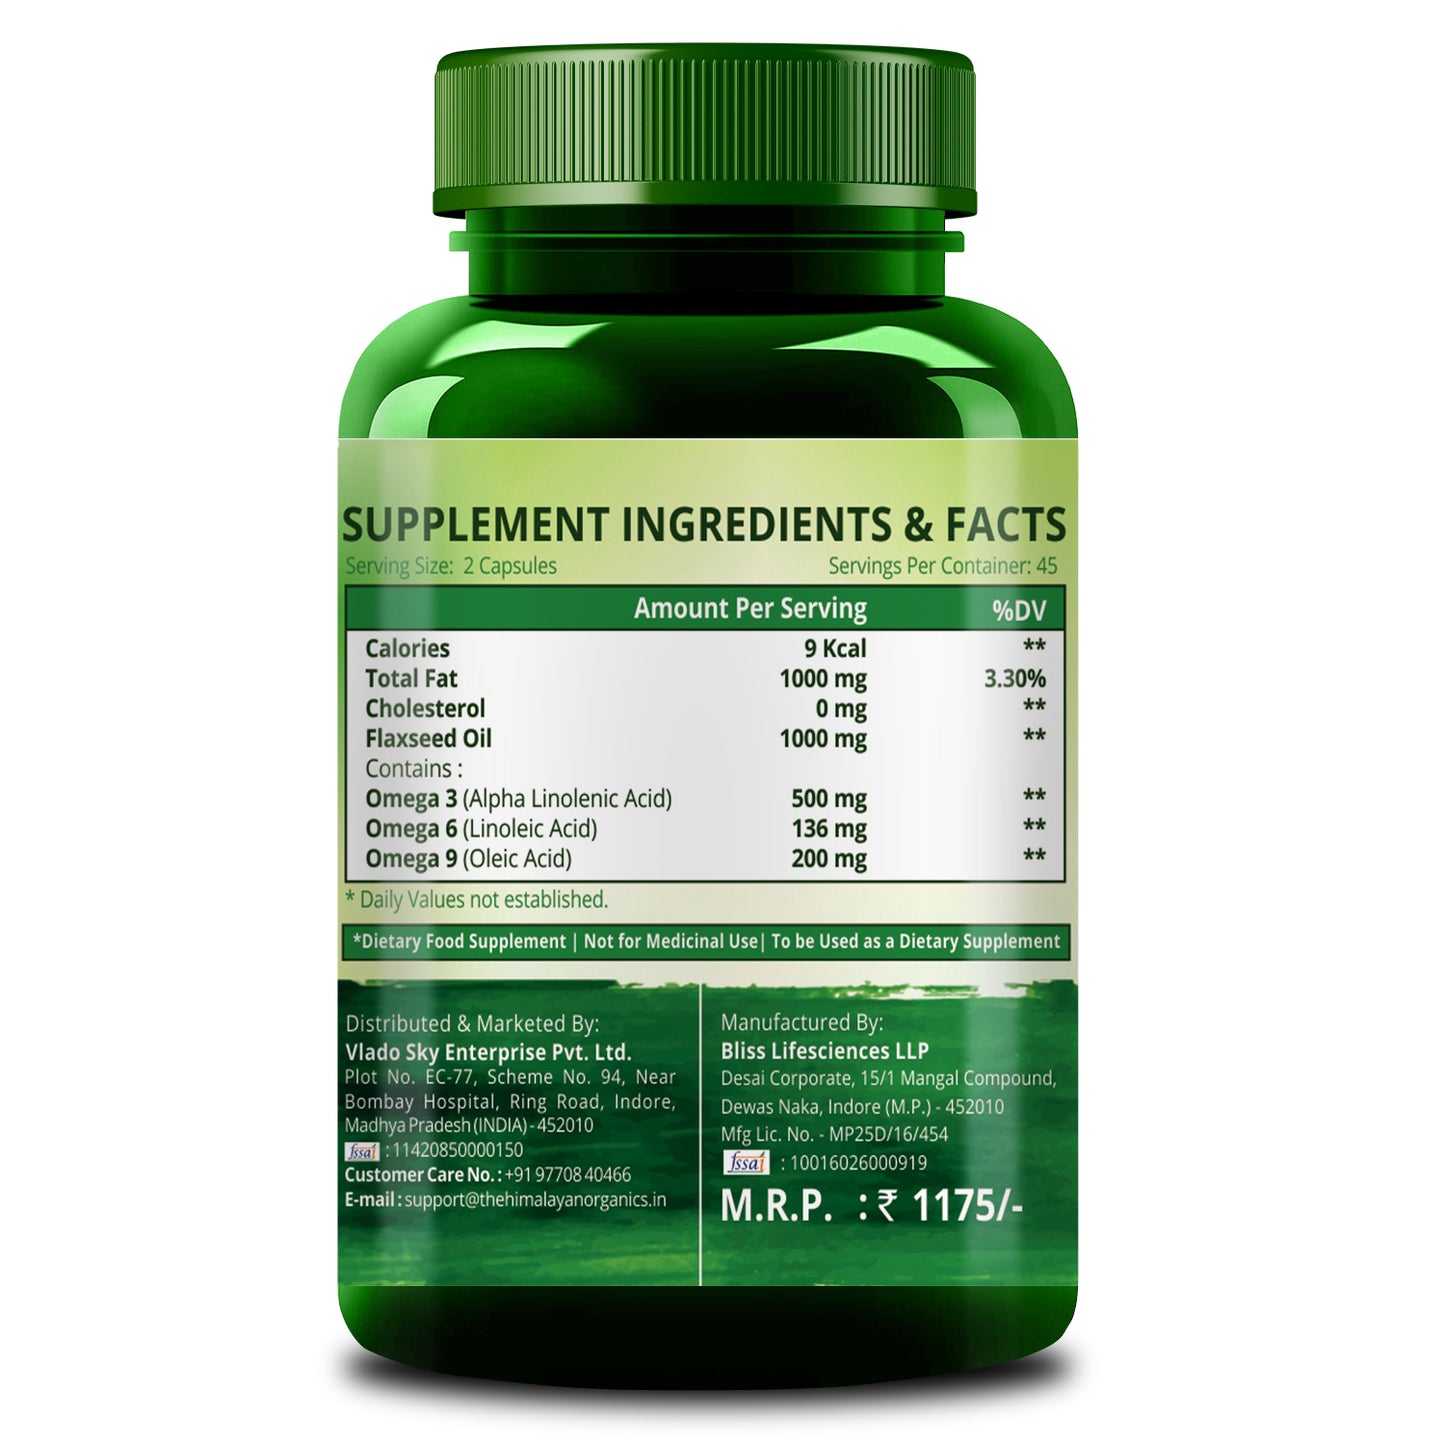 Himalayan Organics Omega 3 Capsule Supplement Ingredients & Facts 